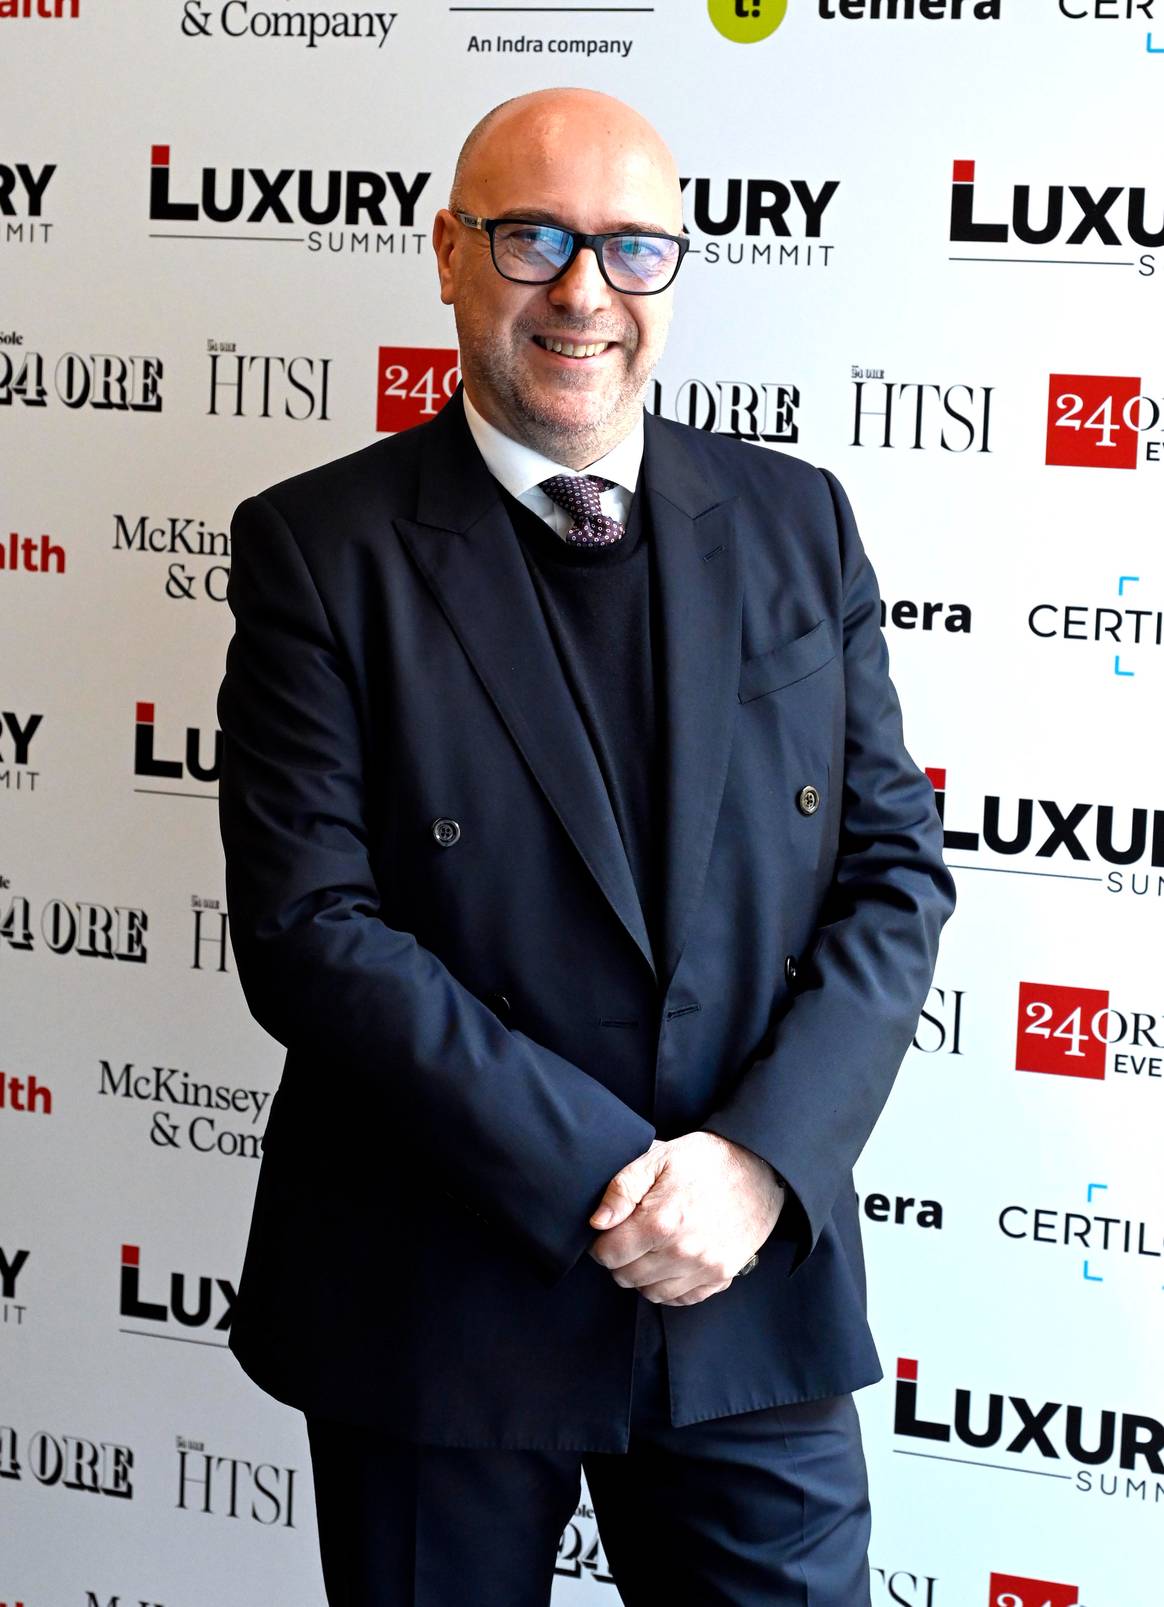 Alfonso Dolce, courtesy of Luxury summit, Sole 24 ore